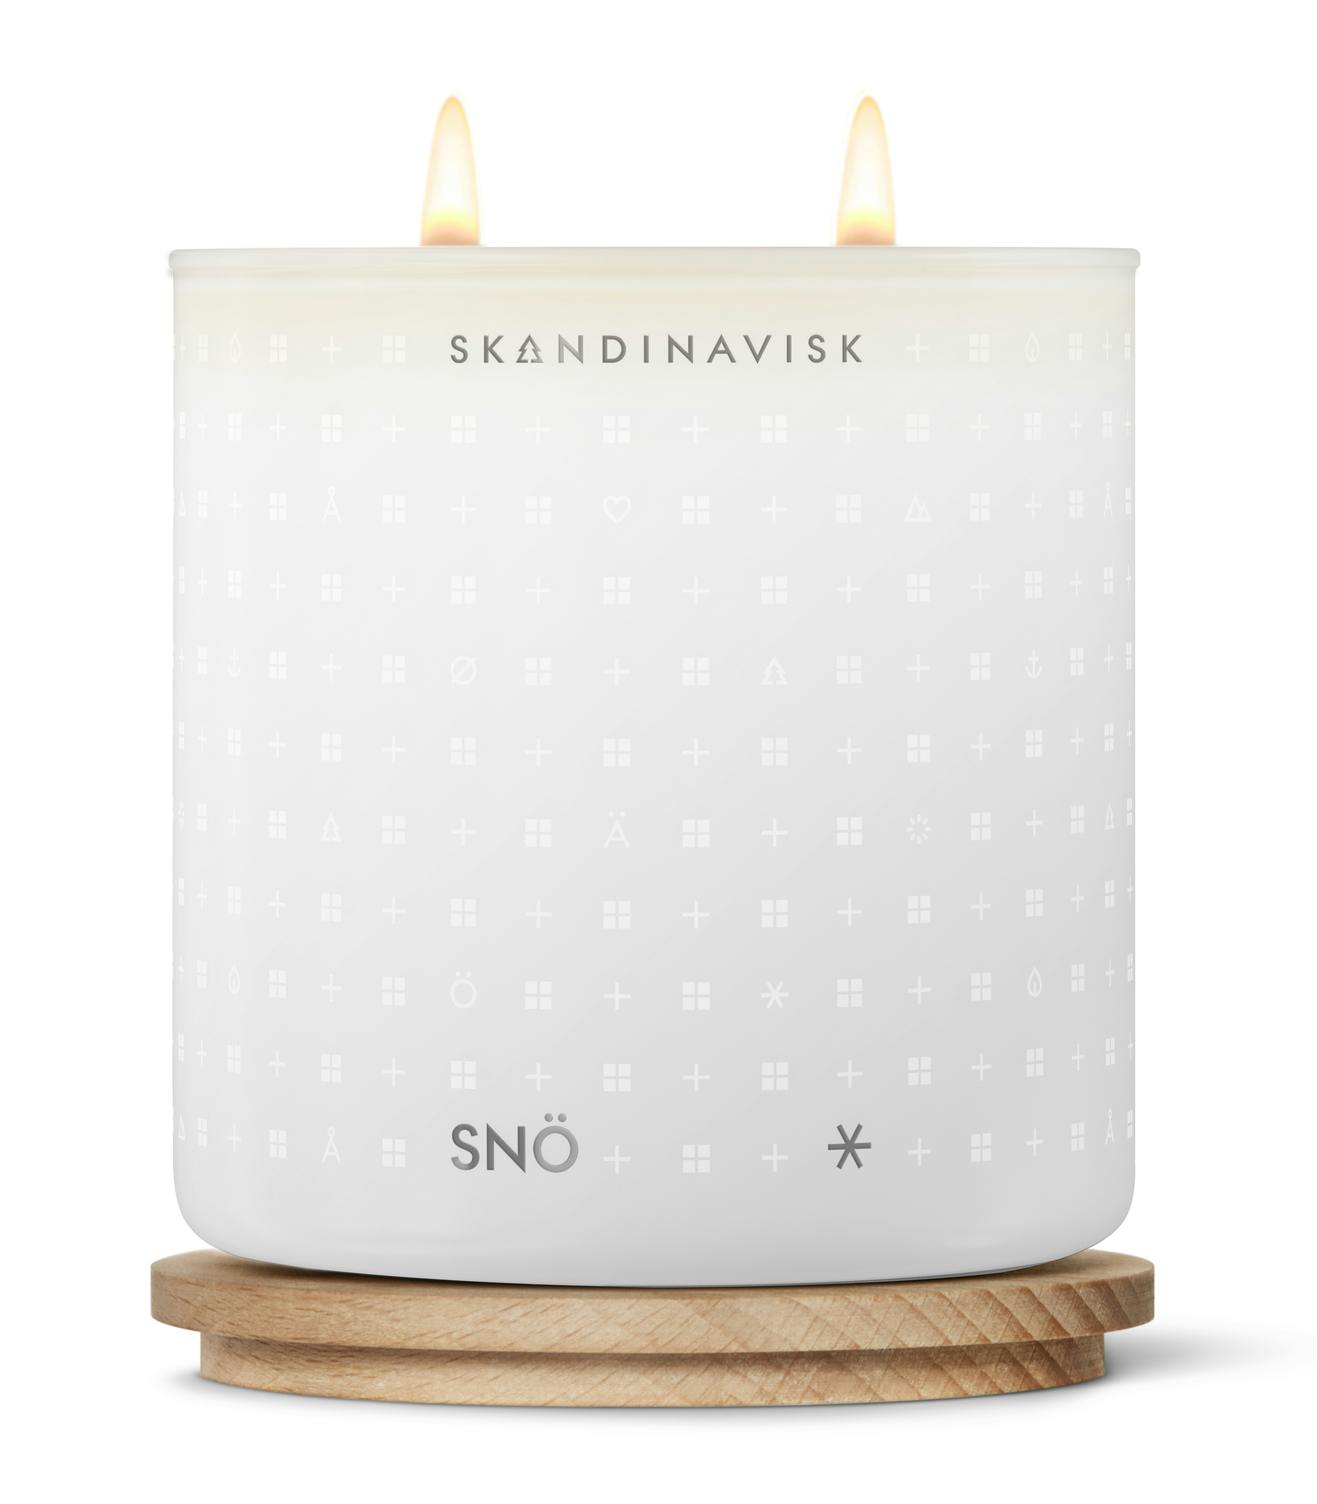 scented candles, vegan candles, organic candles, Skandinavisk, snow, winter candles, Nordic gifts, 2 wick